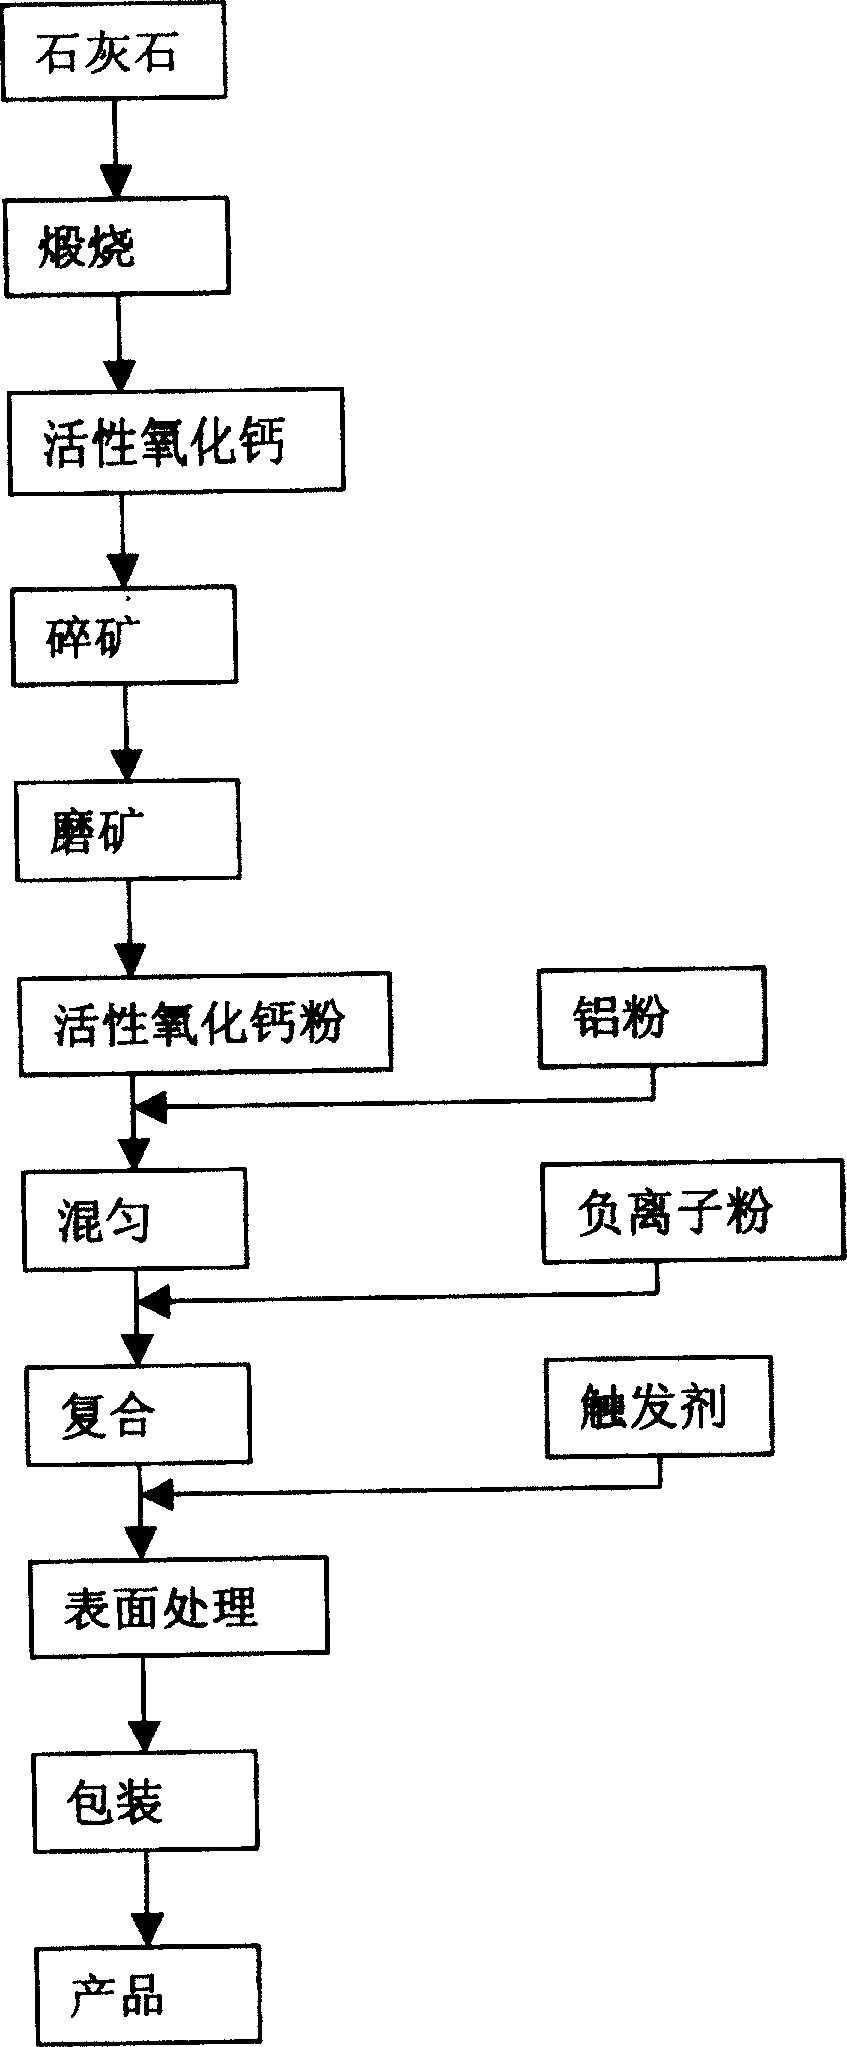 Preparation process of mineral heating agent